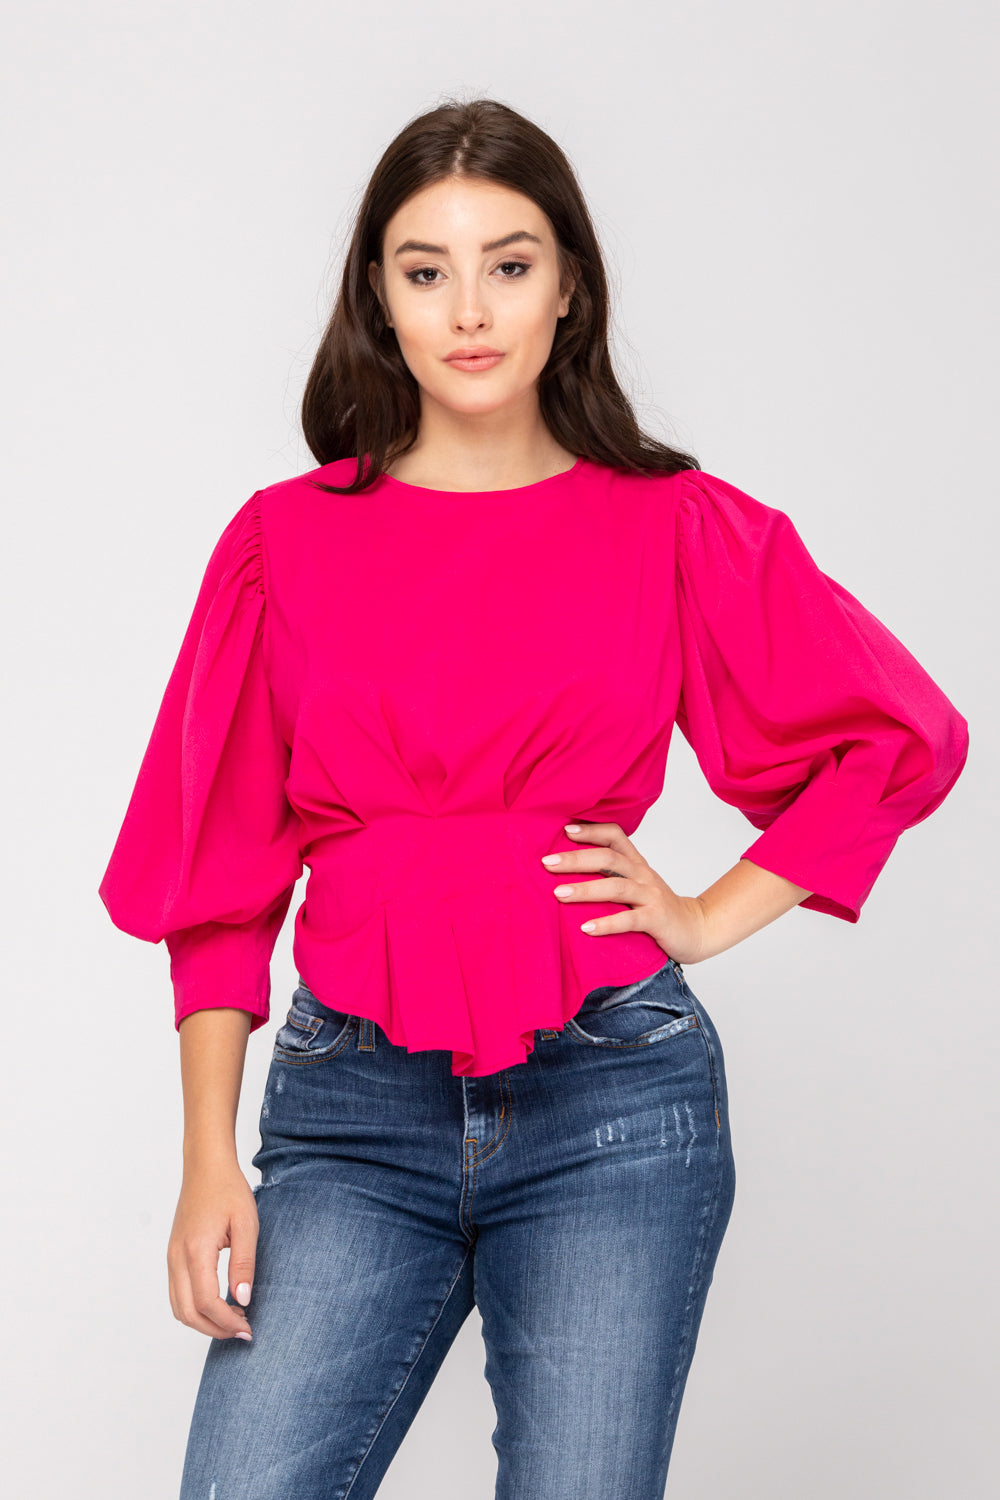 Peplum Back Out Top